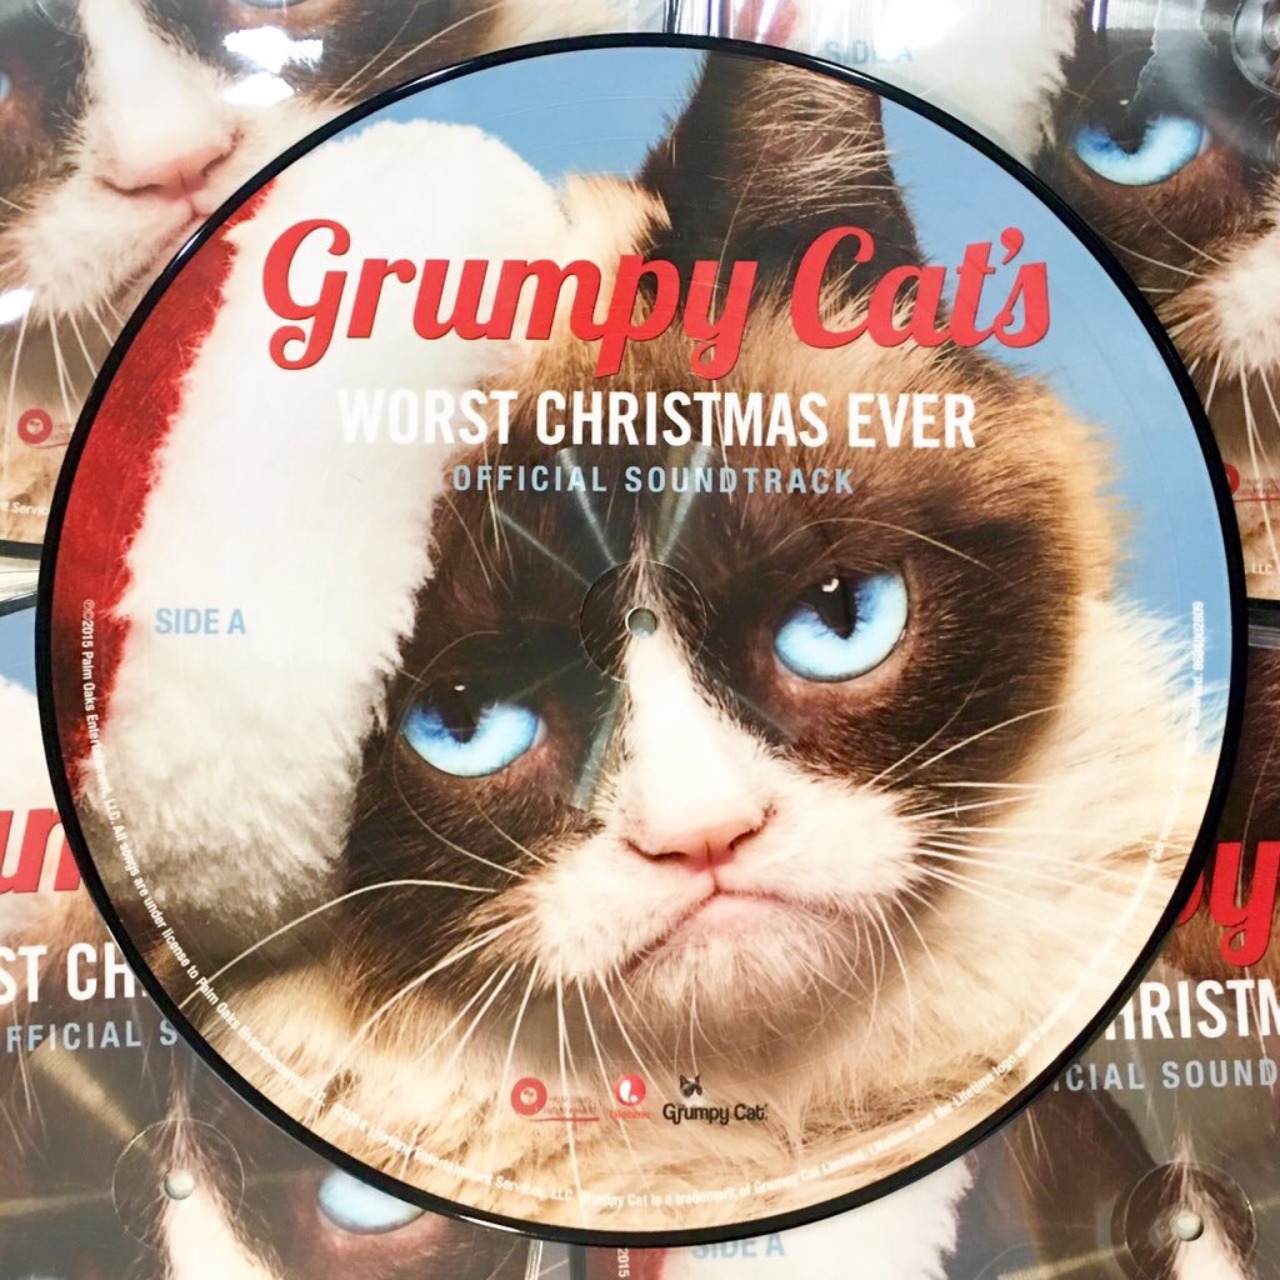 Get the #WorstChristmasEver soundtrack on limited edition vinyl by #Christmas. It's awful: https://grumpy.cat/Xmasvinyl